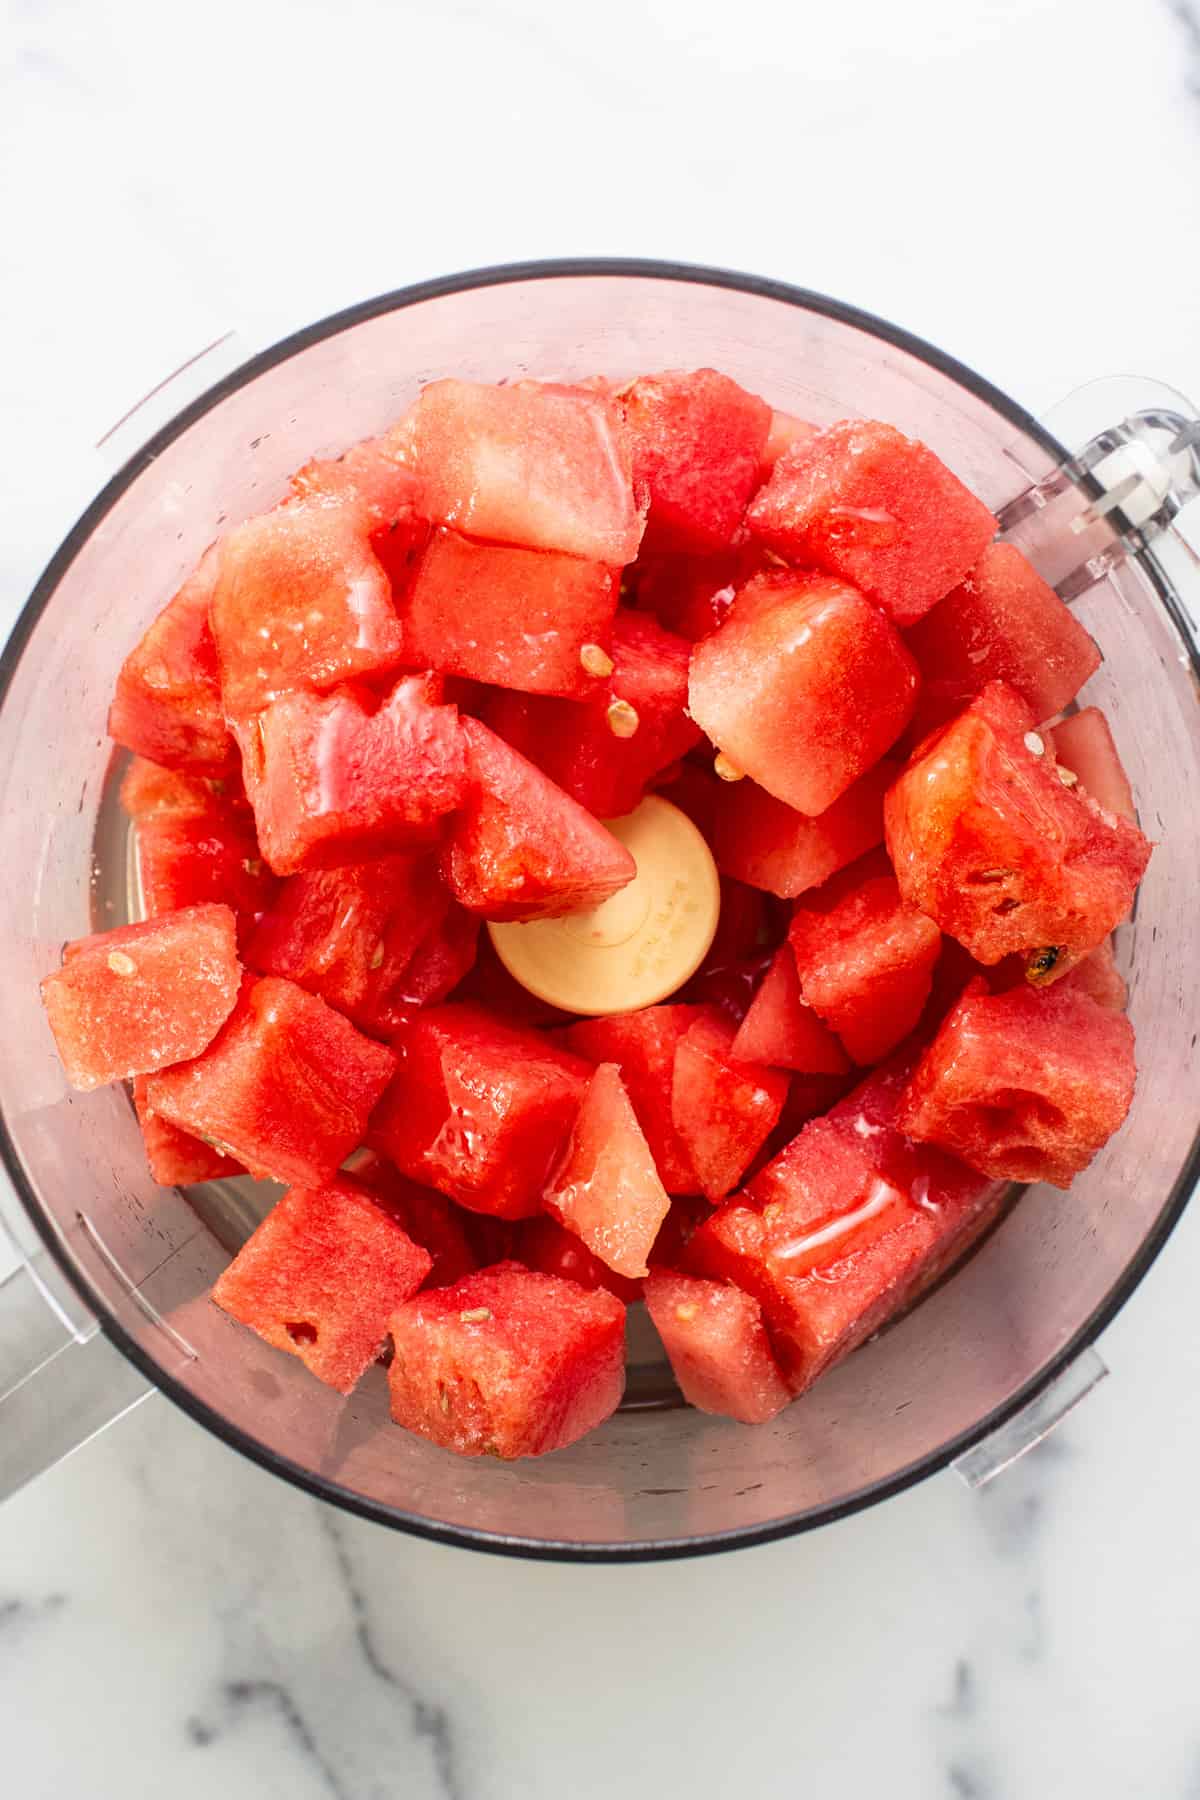 Chunks of fresh red watermelon in a food processor, ready for blending.